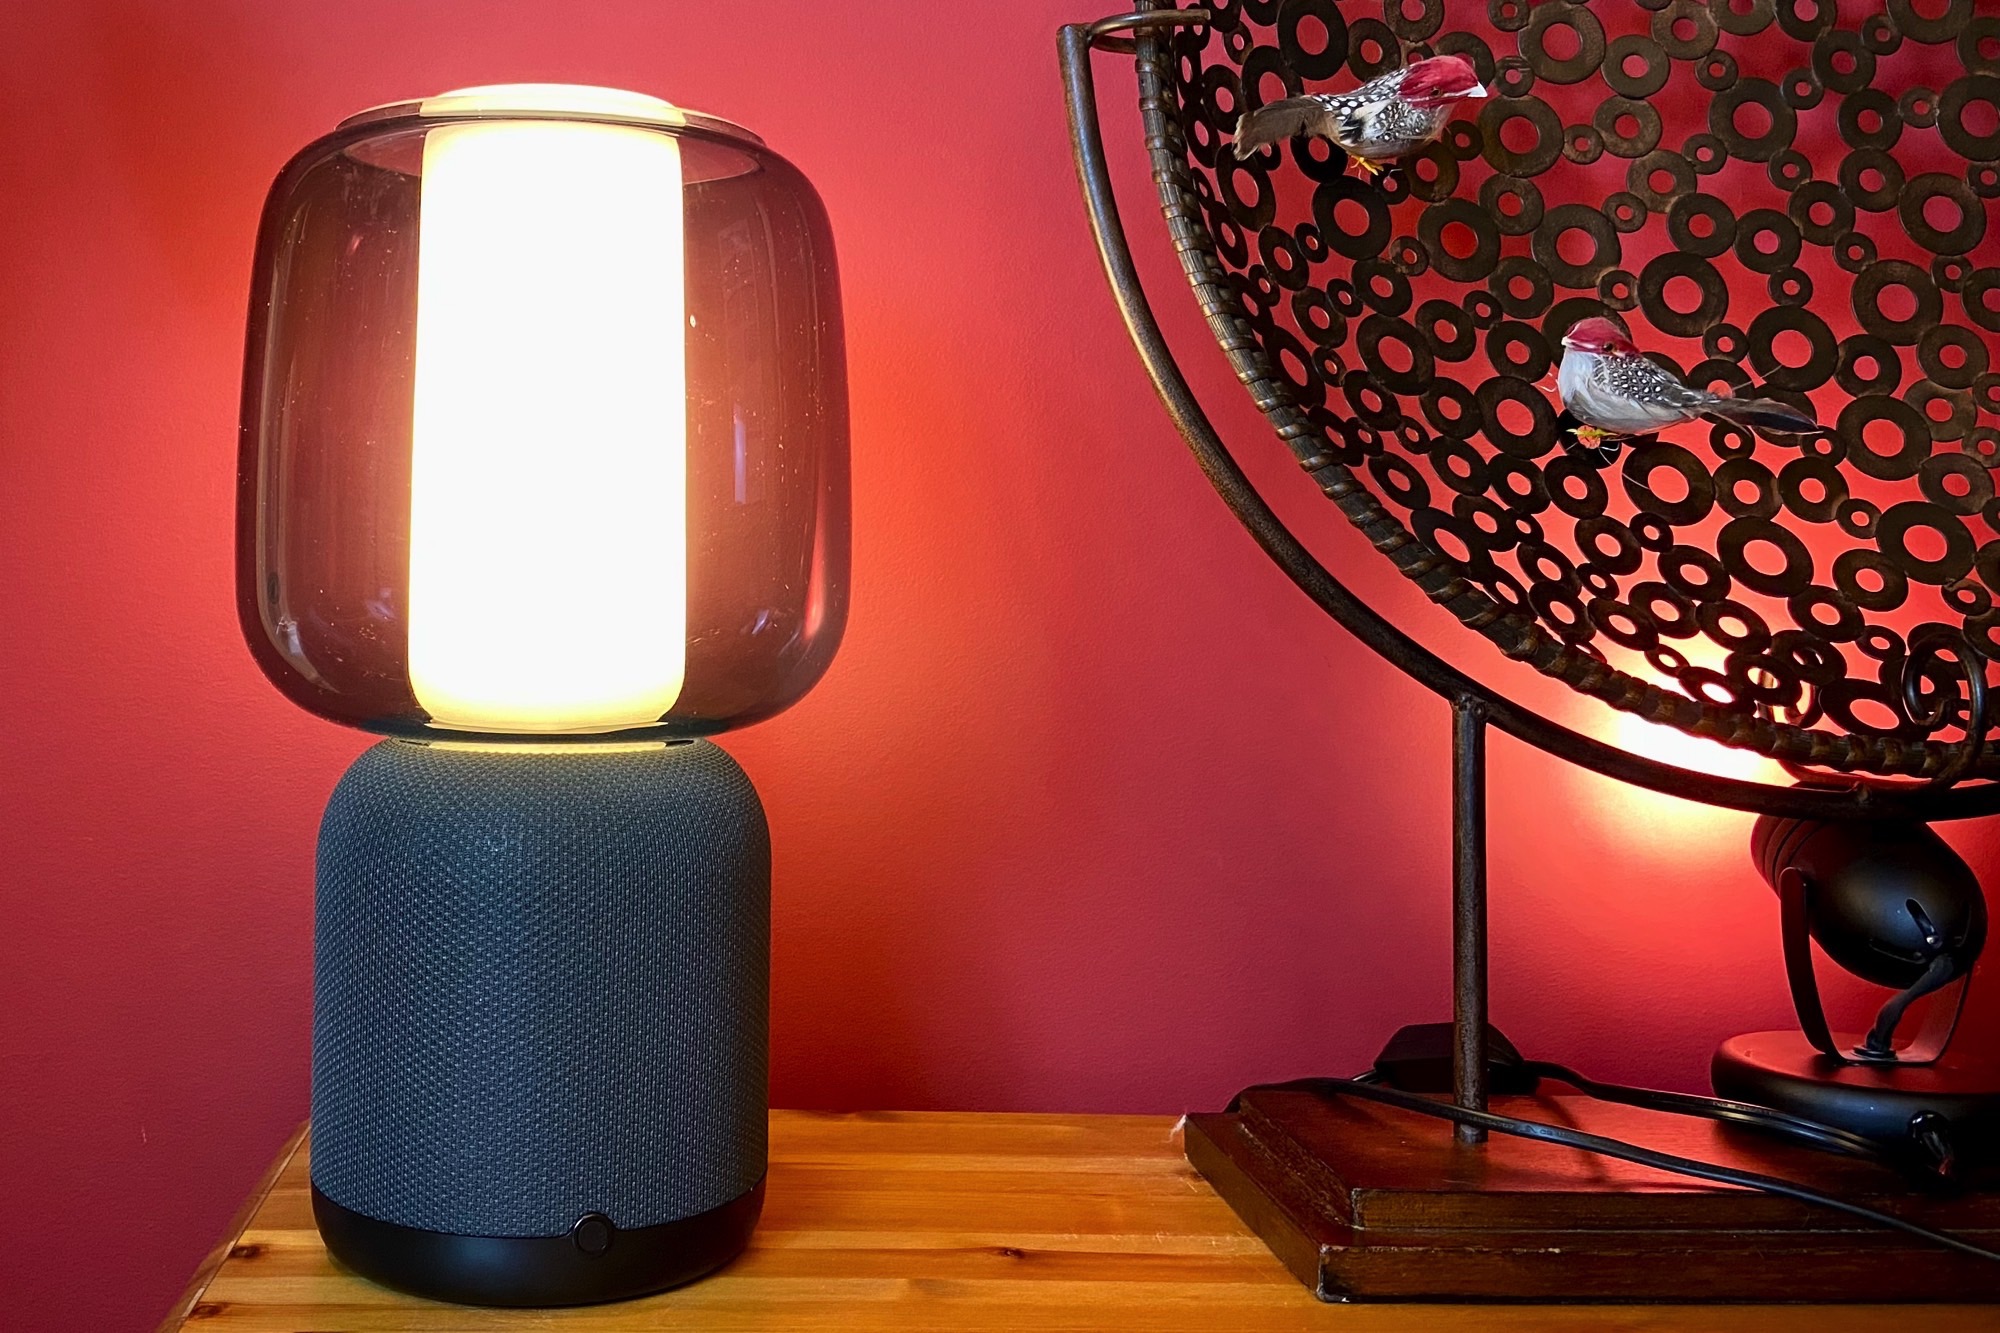 Ikea Lamp Review: More More Sound | Digital Trends